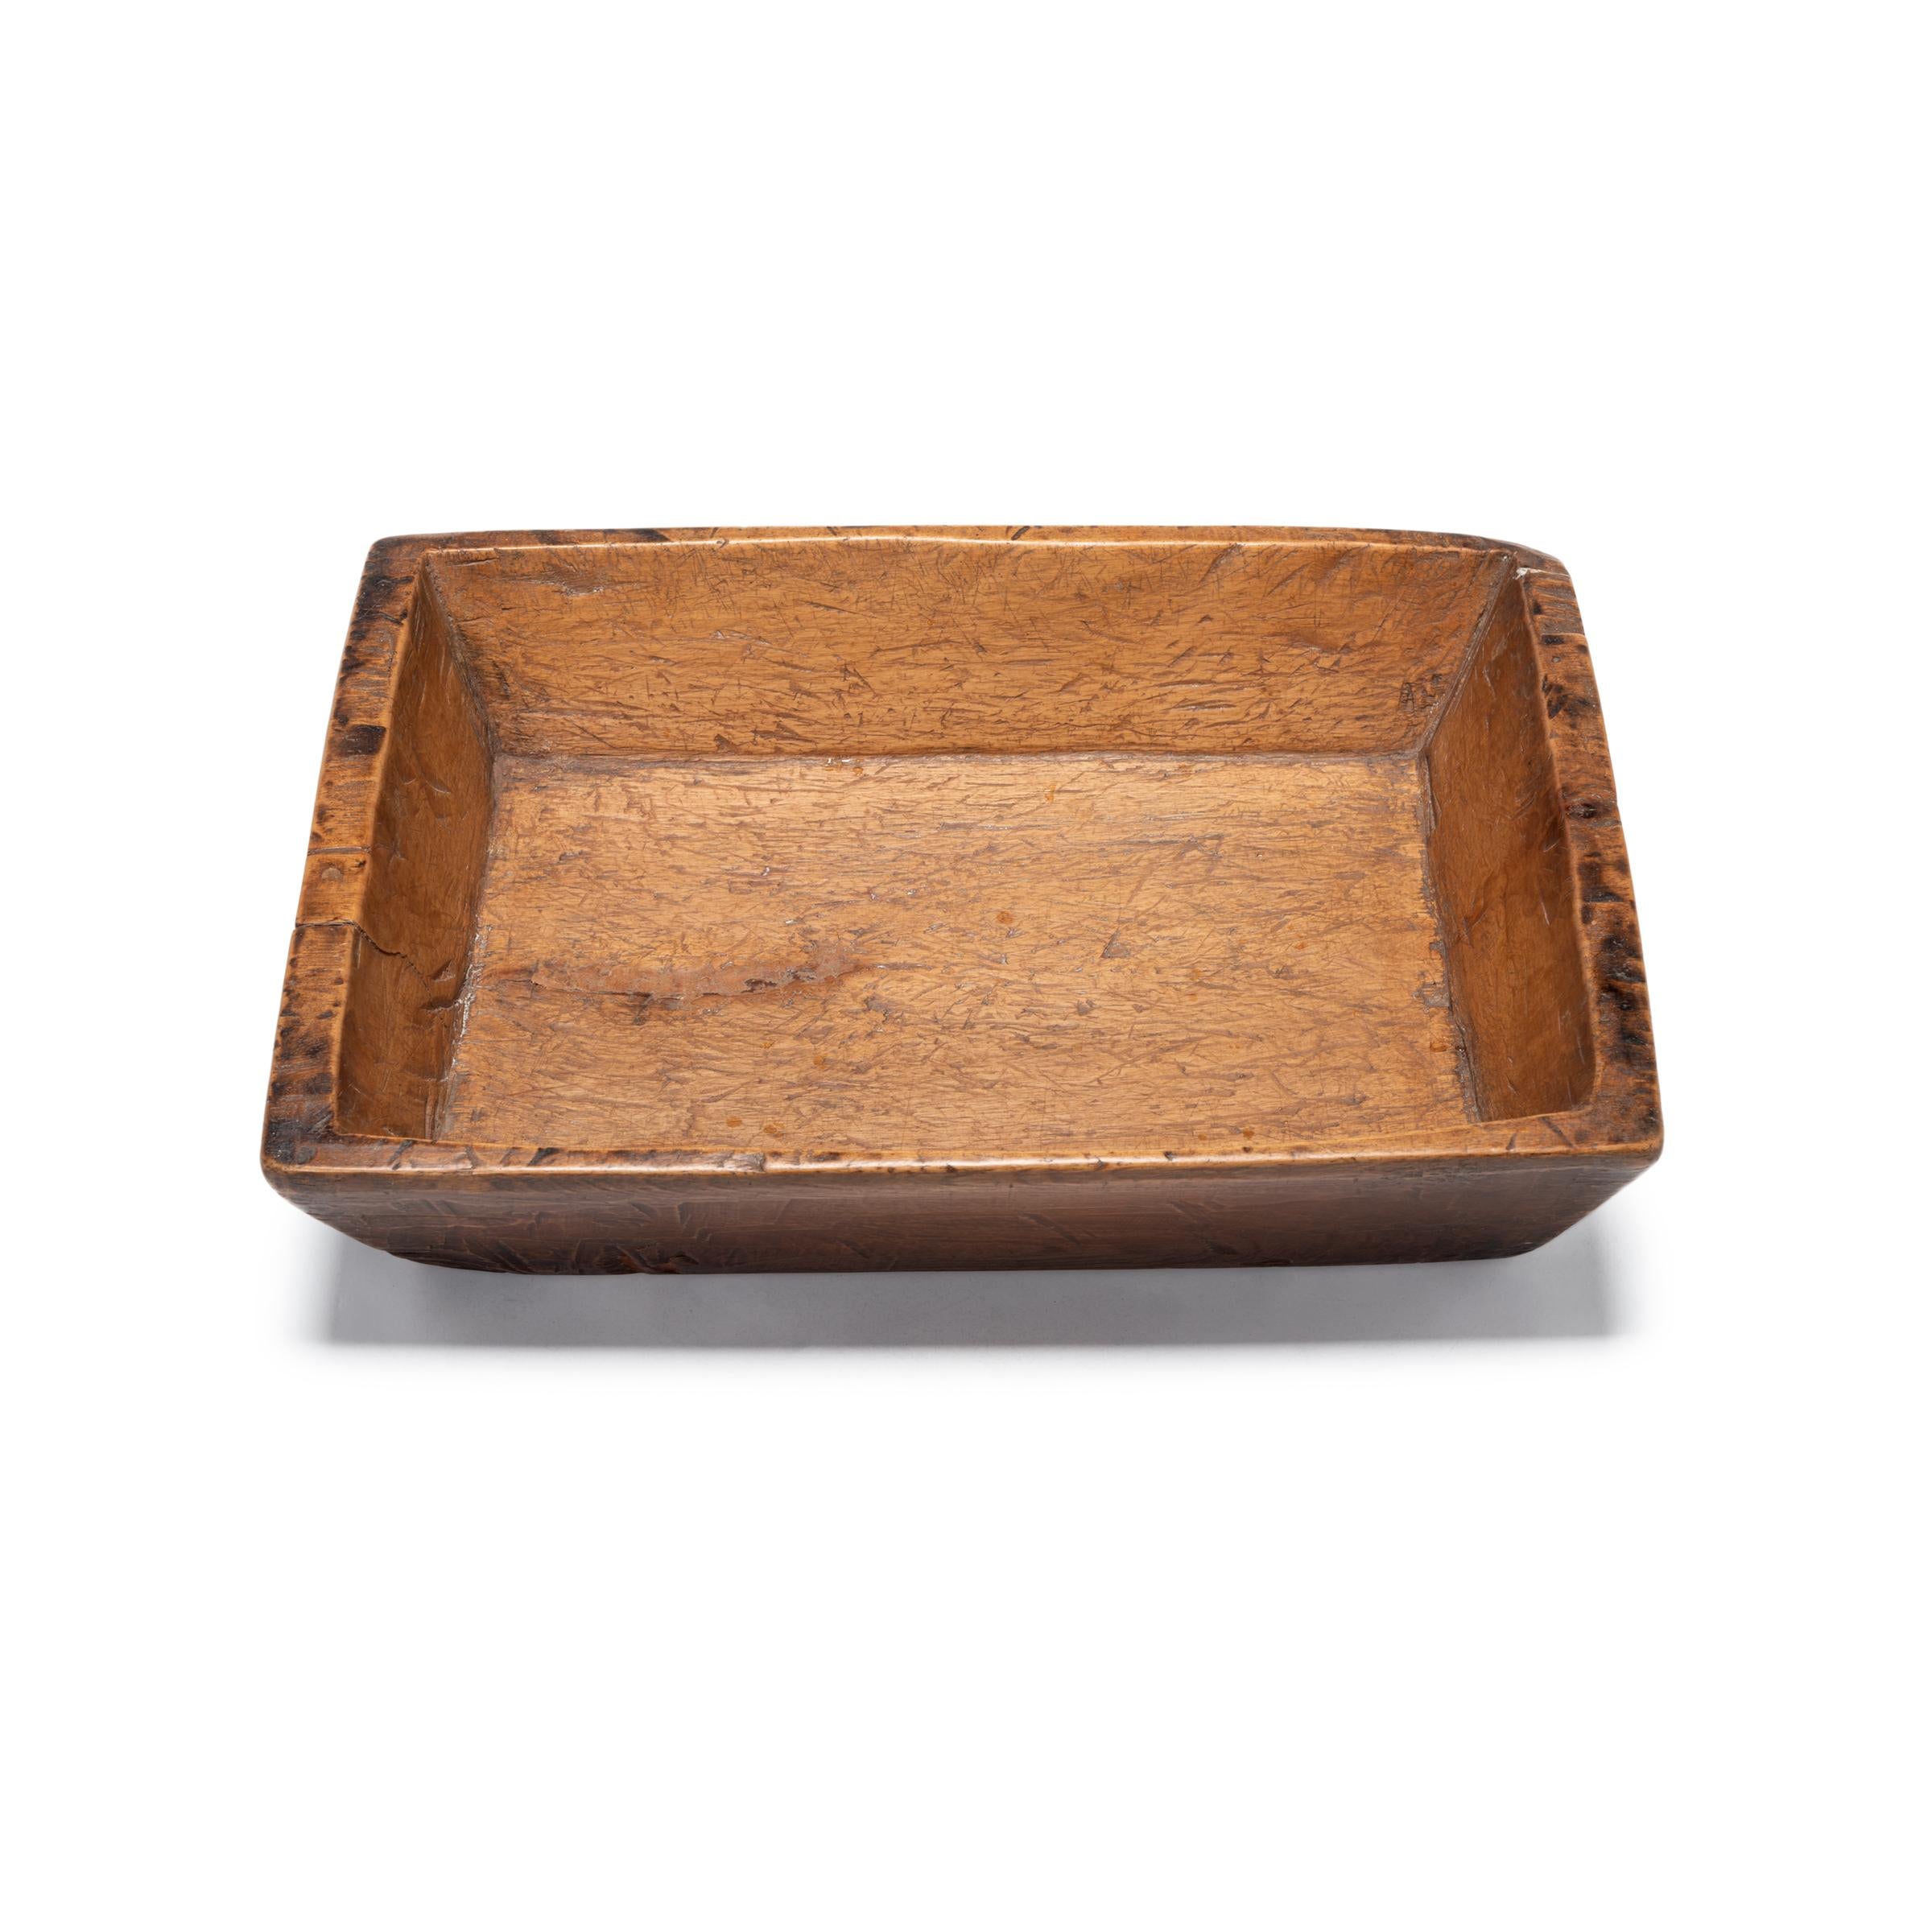 Carved from pine, this hundred-year-old tray made in northern China charms with its rustic character and simple shape. Marked with use and distinguished by the natural grain and knots of wood, the tray brings its timeless appeal to modern interiors